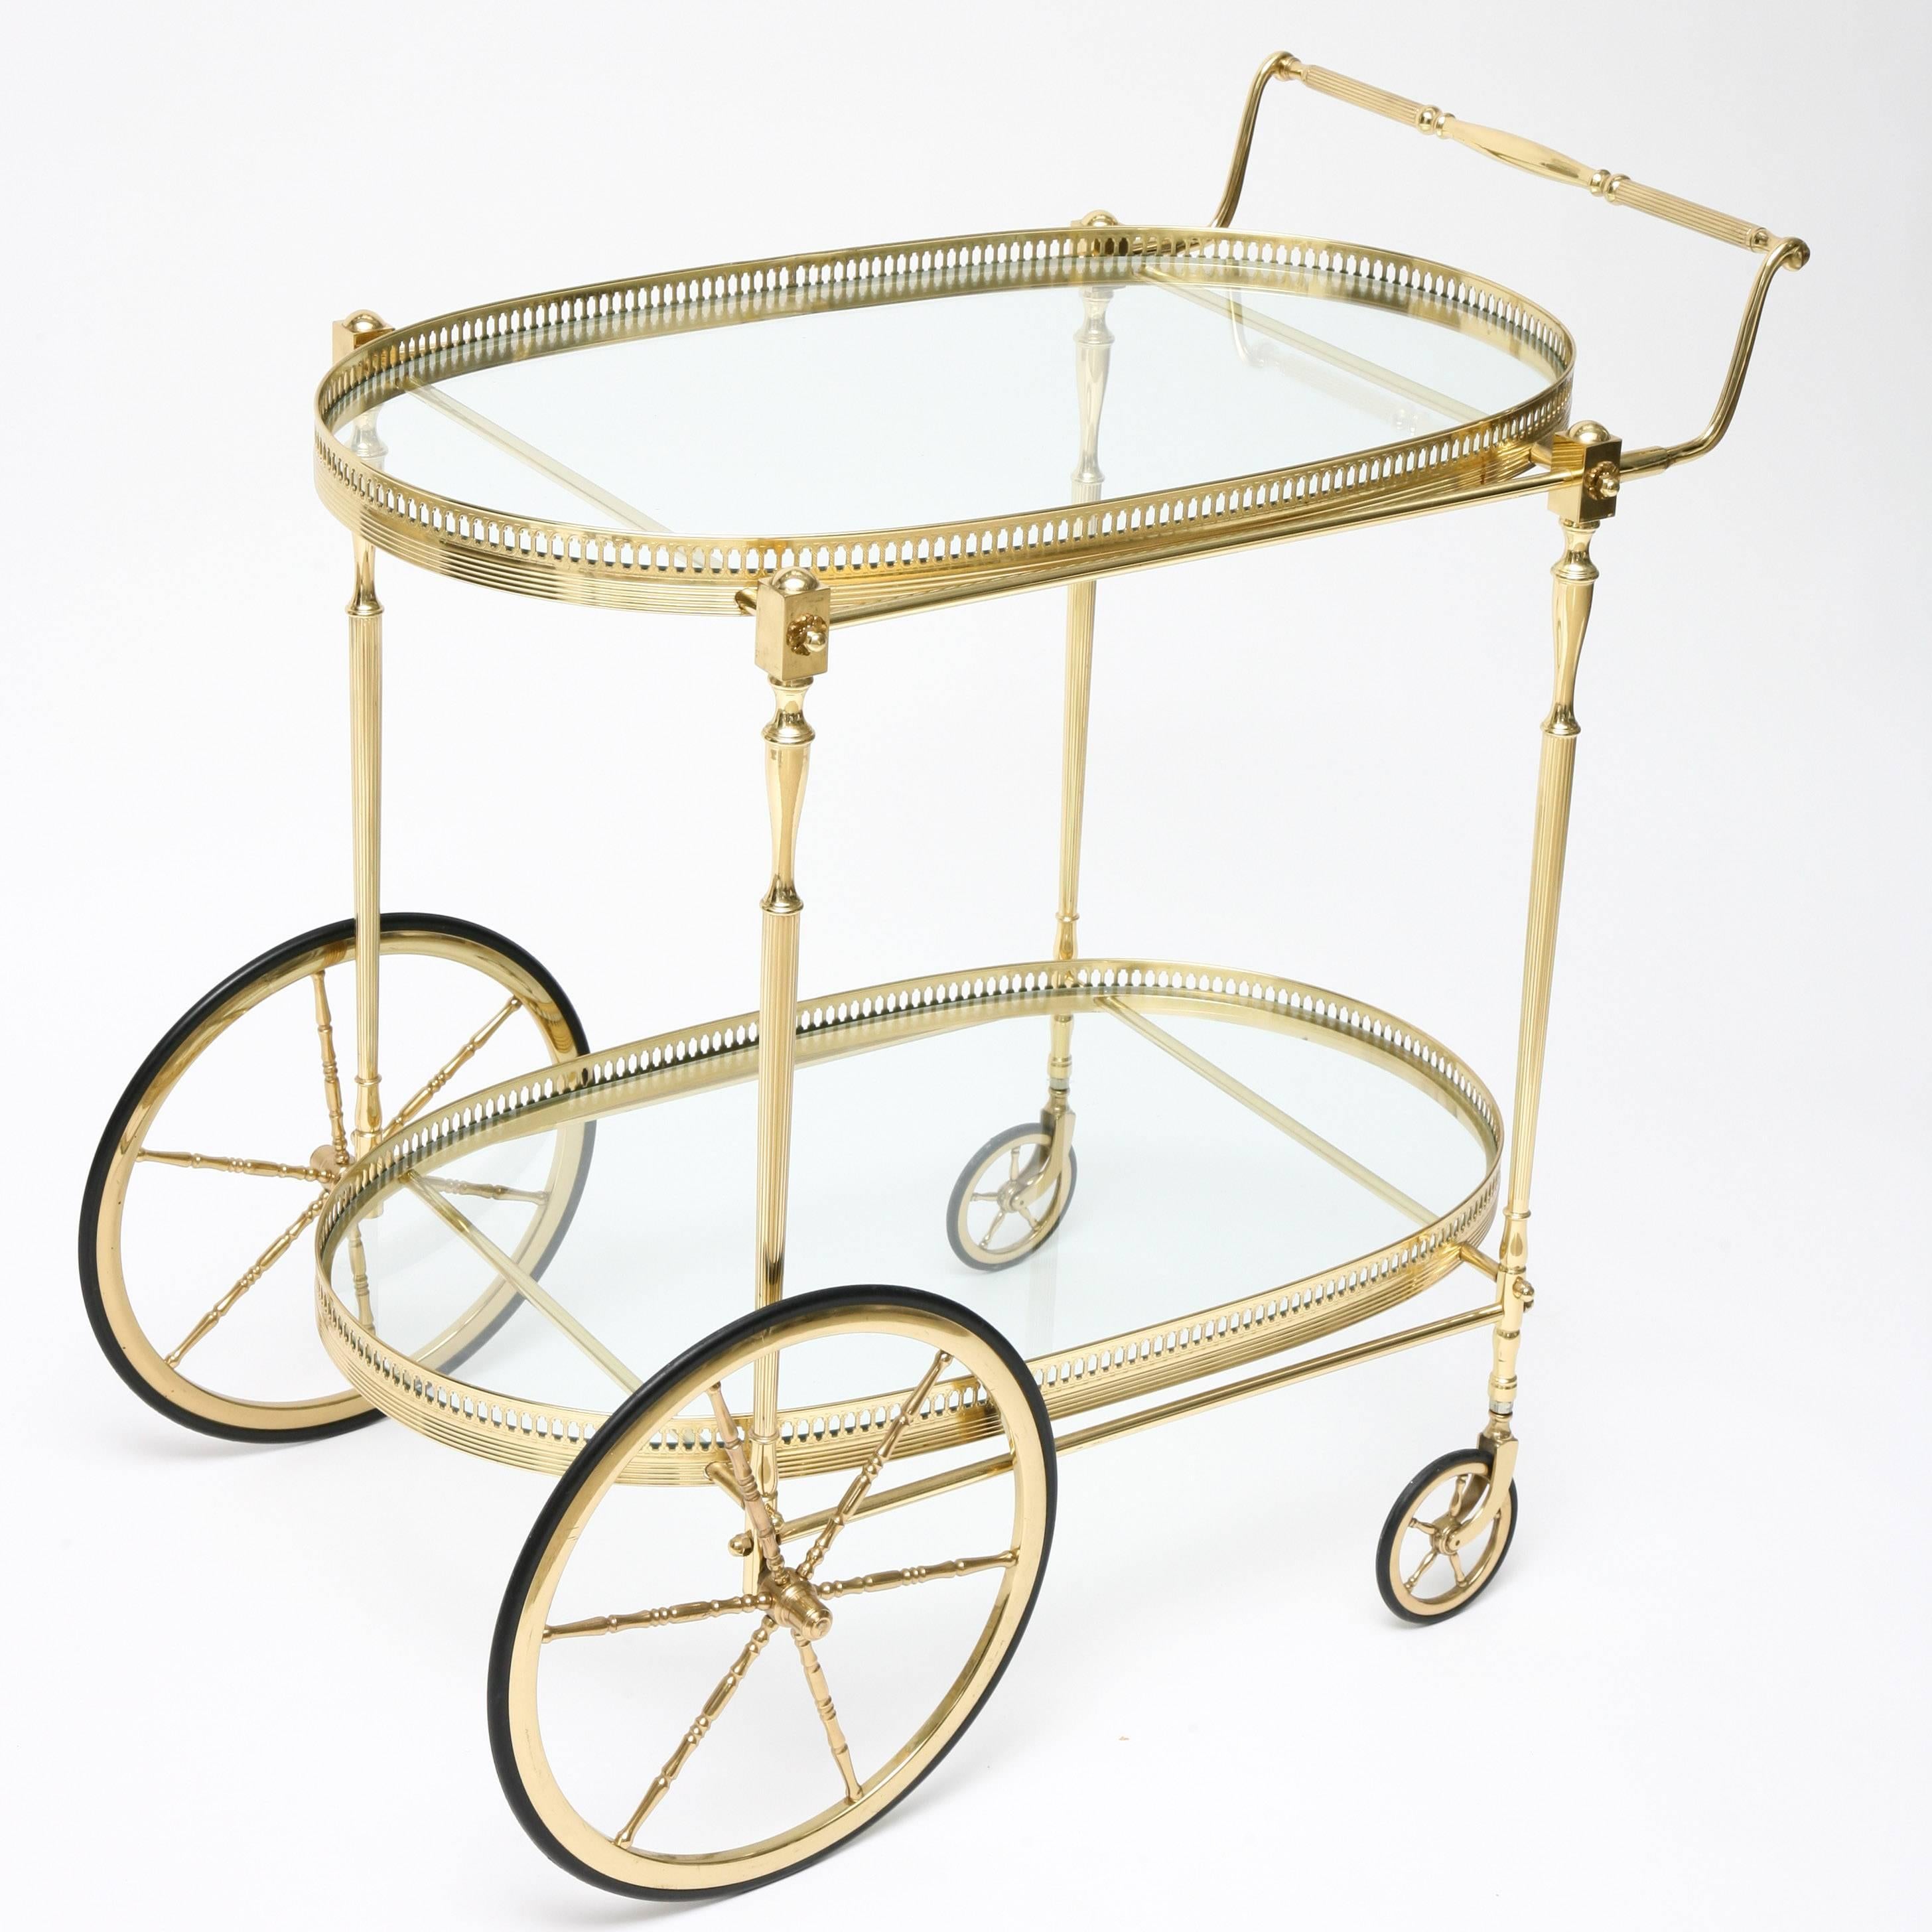 This glamorous Hollywood-Regency style polished brass and glass, two-tiered, race-track design bar cart is very much in the style and quality of pieces created by Maison Jansen in the 1960s and 1970s. With its tray-like upper and lower sections